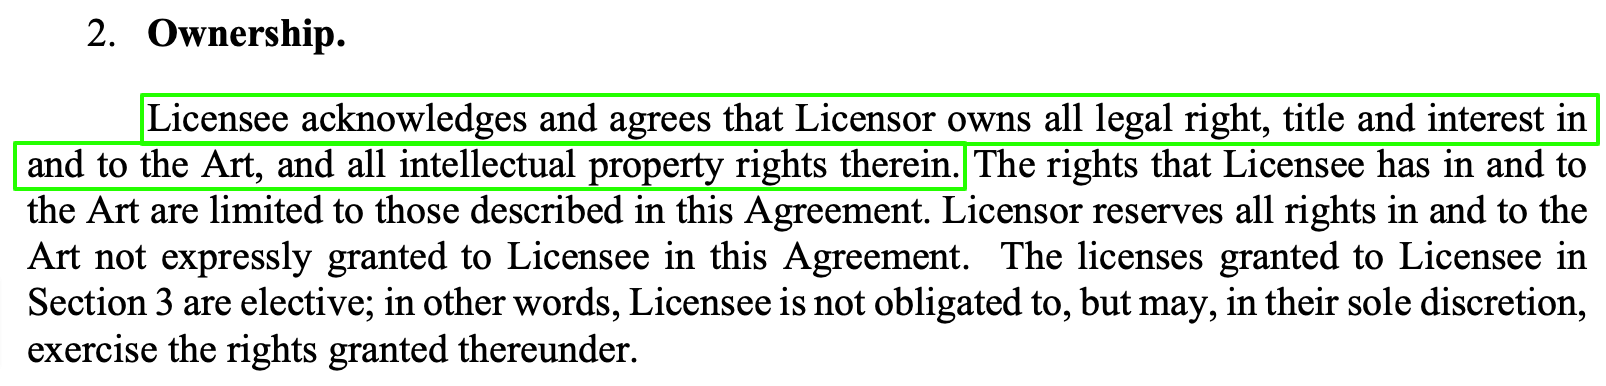 web3-legal-intellectual-property-rights-fair-use-ownership-example-2